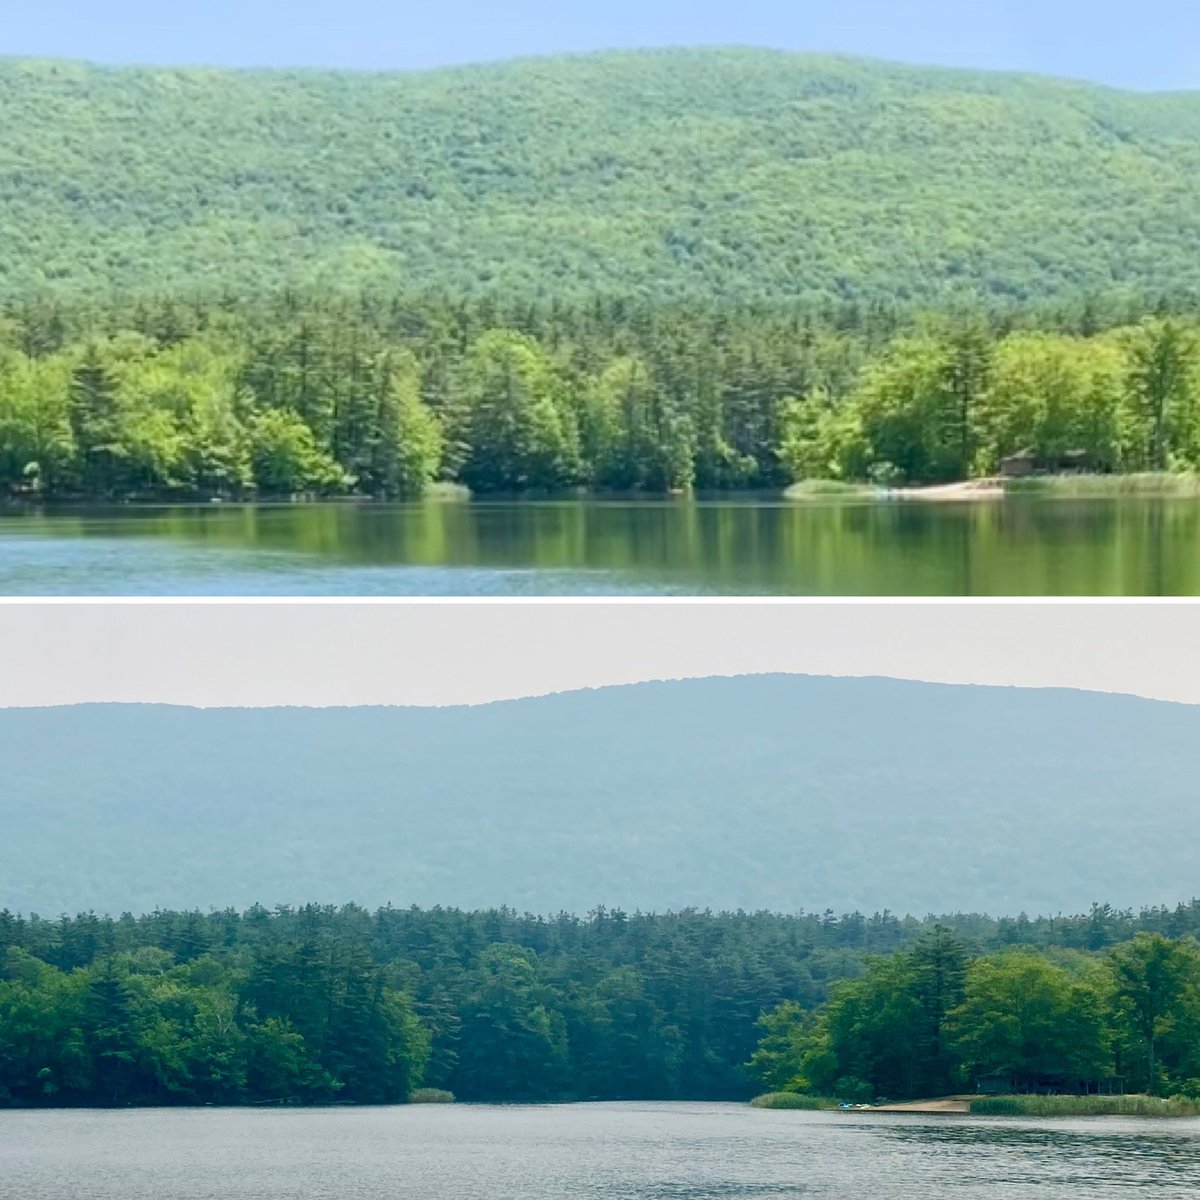 Lake view on a normal day
VS
Lake view smoked out
#WesternMass #Massachusetts #CanadaFires #RainForCanada 🙏